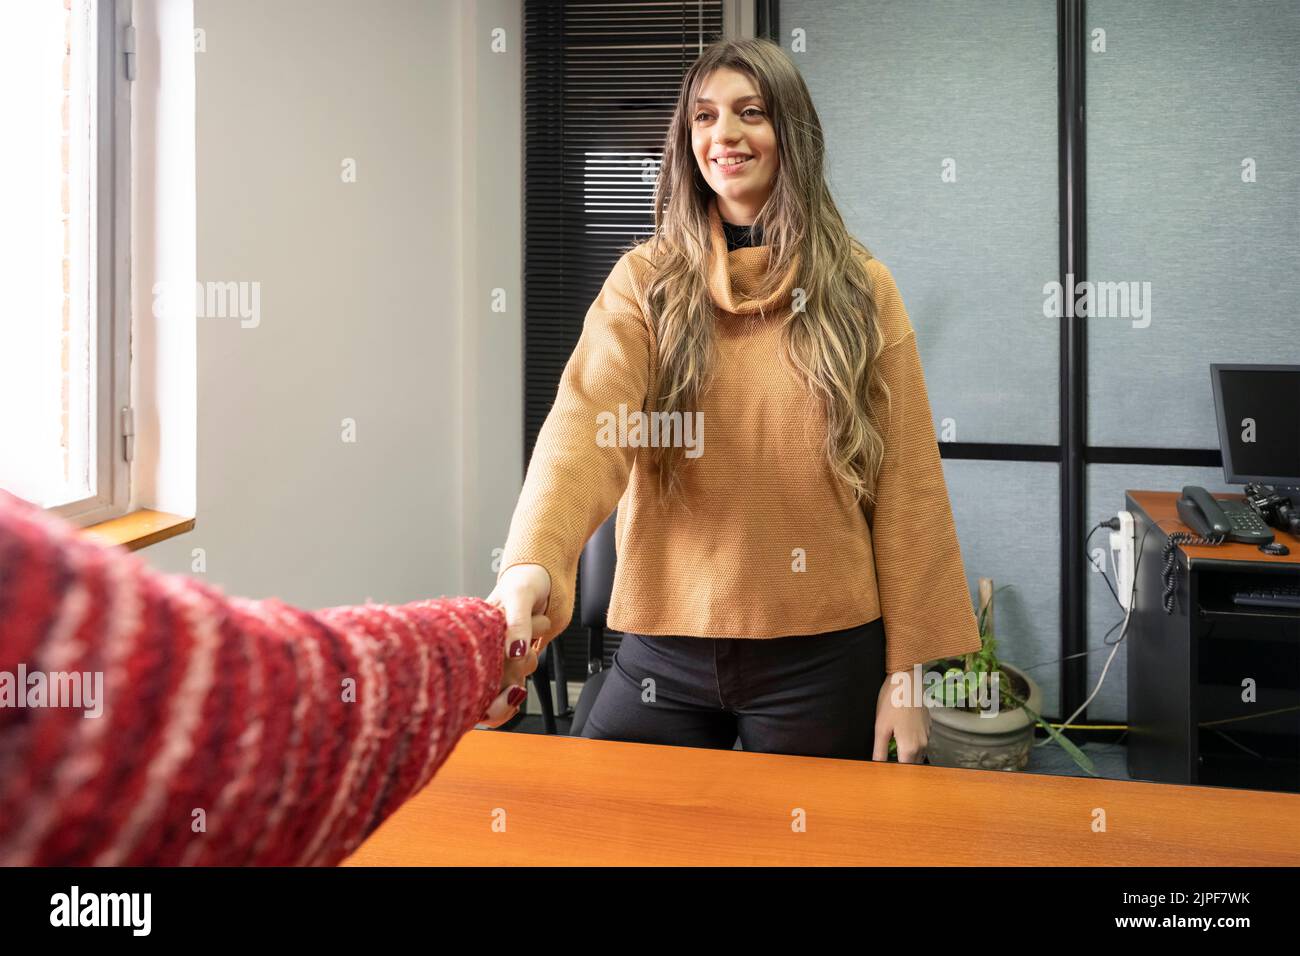 Smiling business woman shaking hands with another. Concept of deal, success, agreement Stock Photo